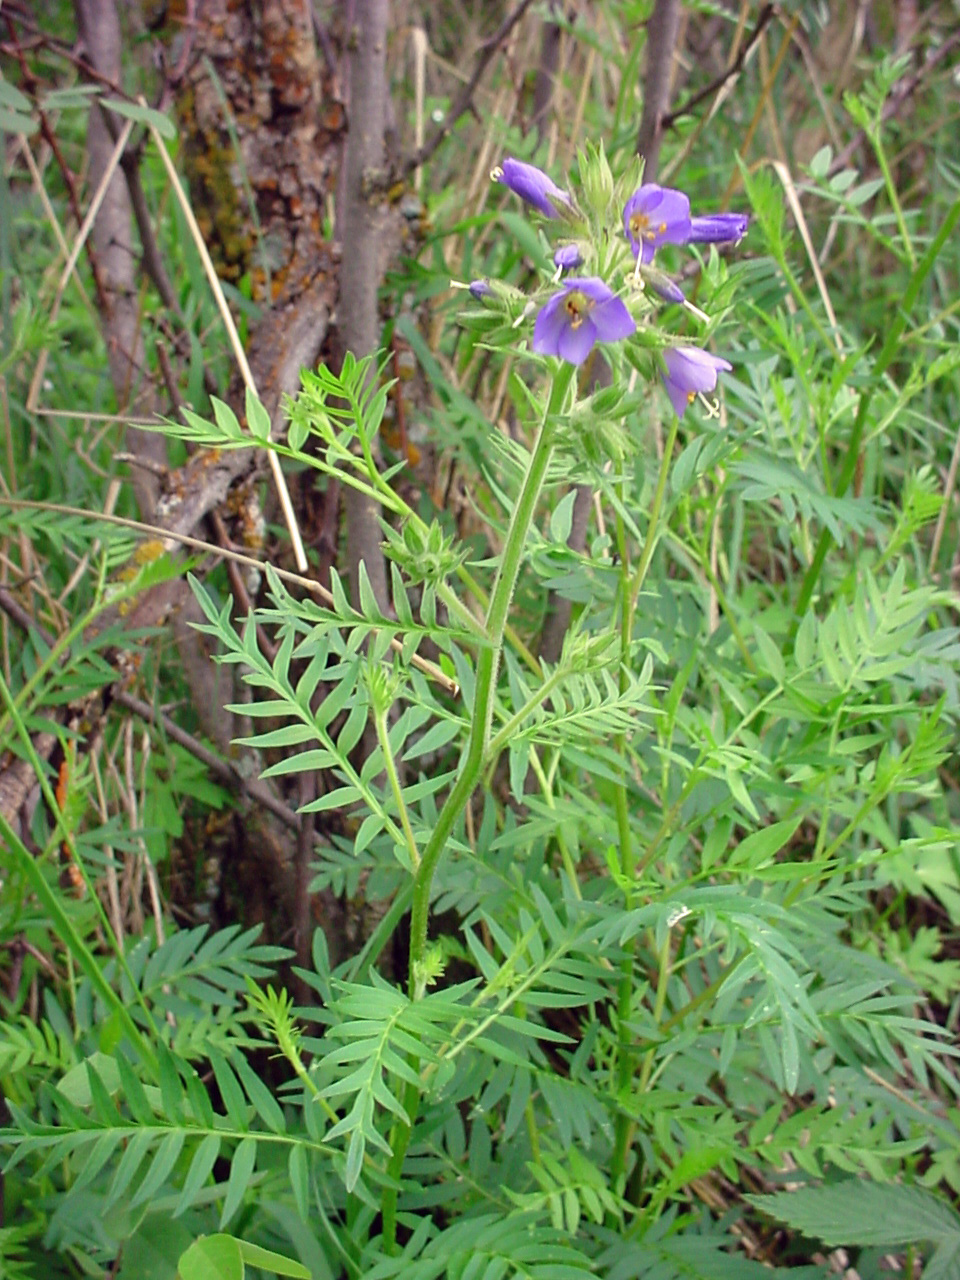 Stem with cluster of flowers